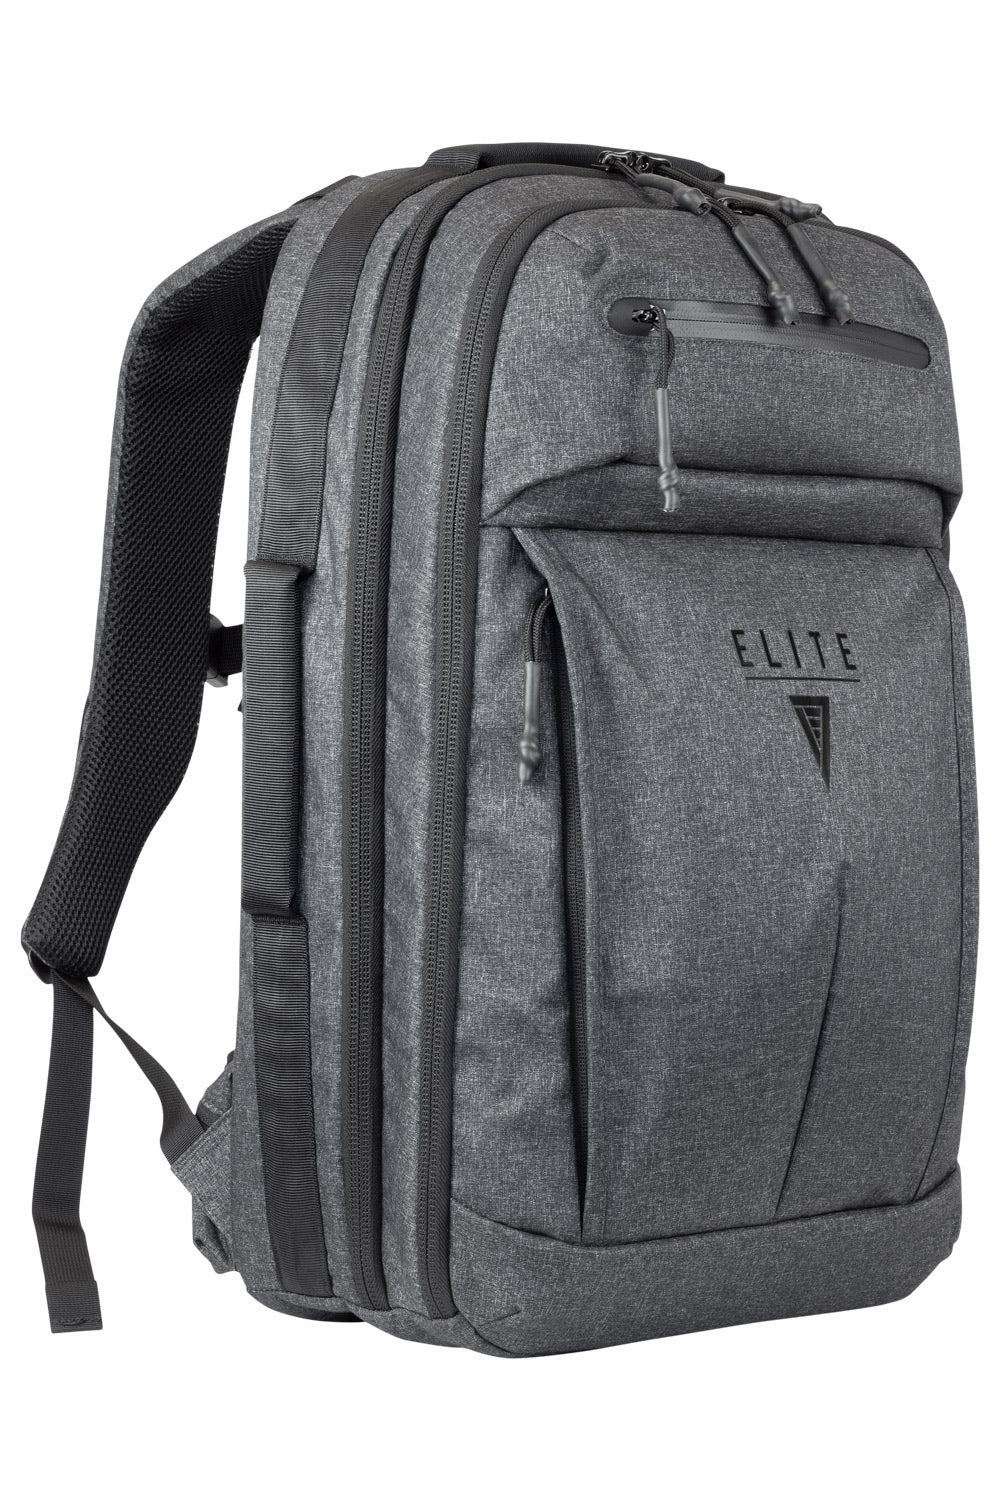 Elite Survival Systems Stealth SBR Backpack Heather Gray 7726-H